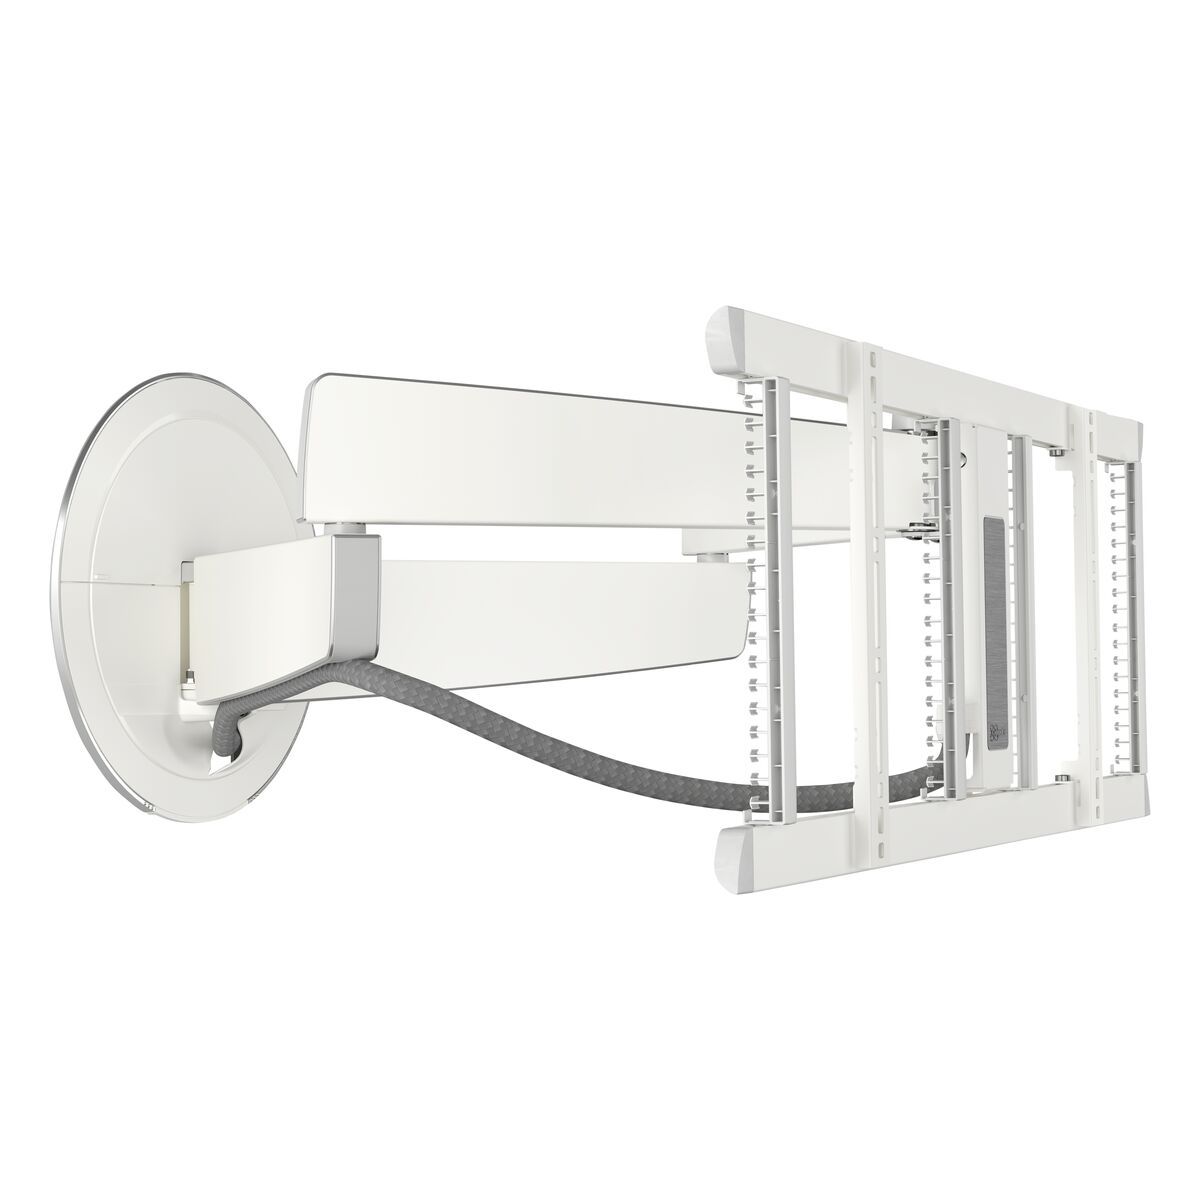 Vogel's TVM 7655 Full-Motion TV Wall Mount (white) - Suitable for 40 up to 77 inch TVs up to Forward and turning motion (up to 120°) - Product